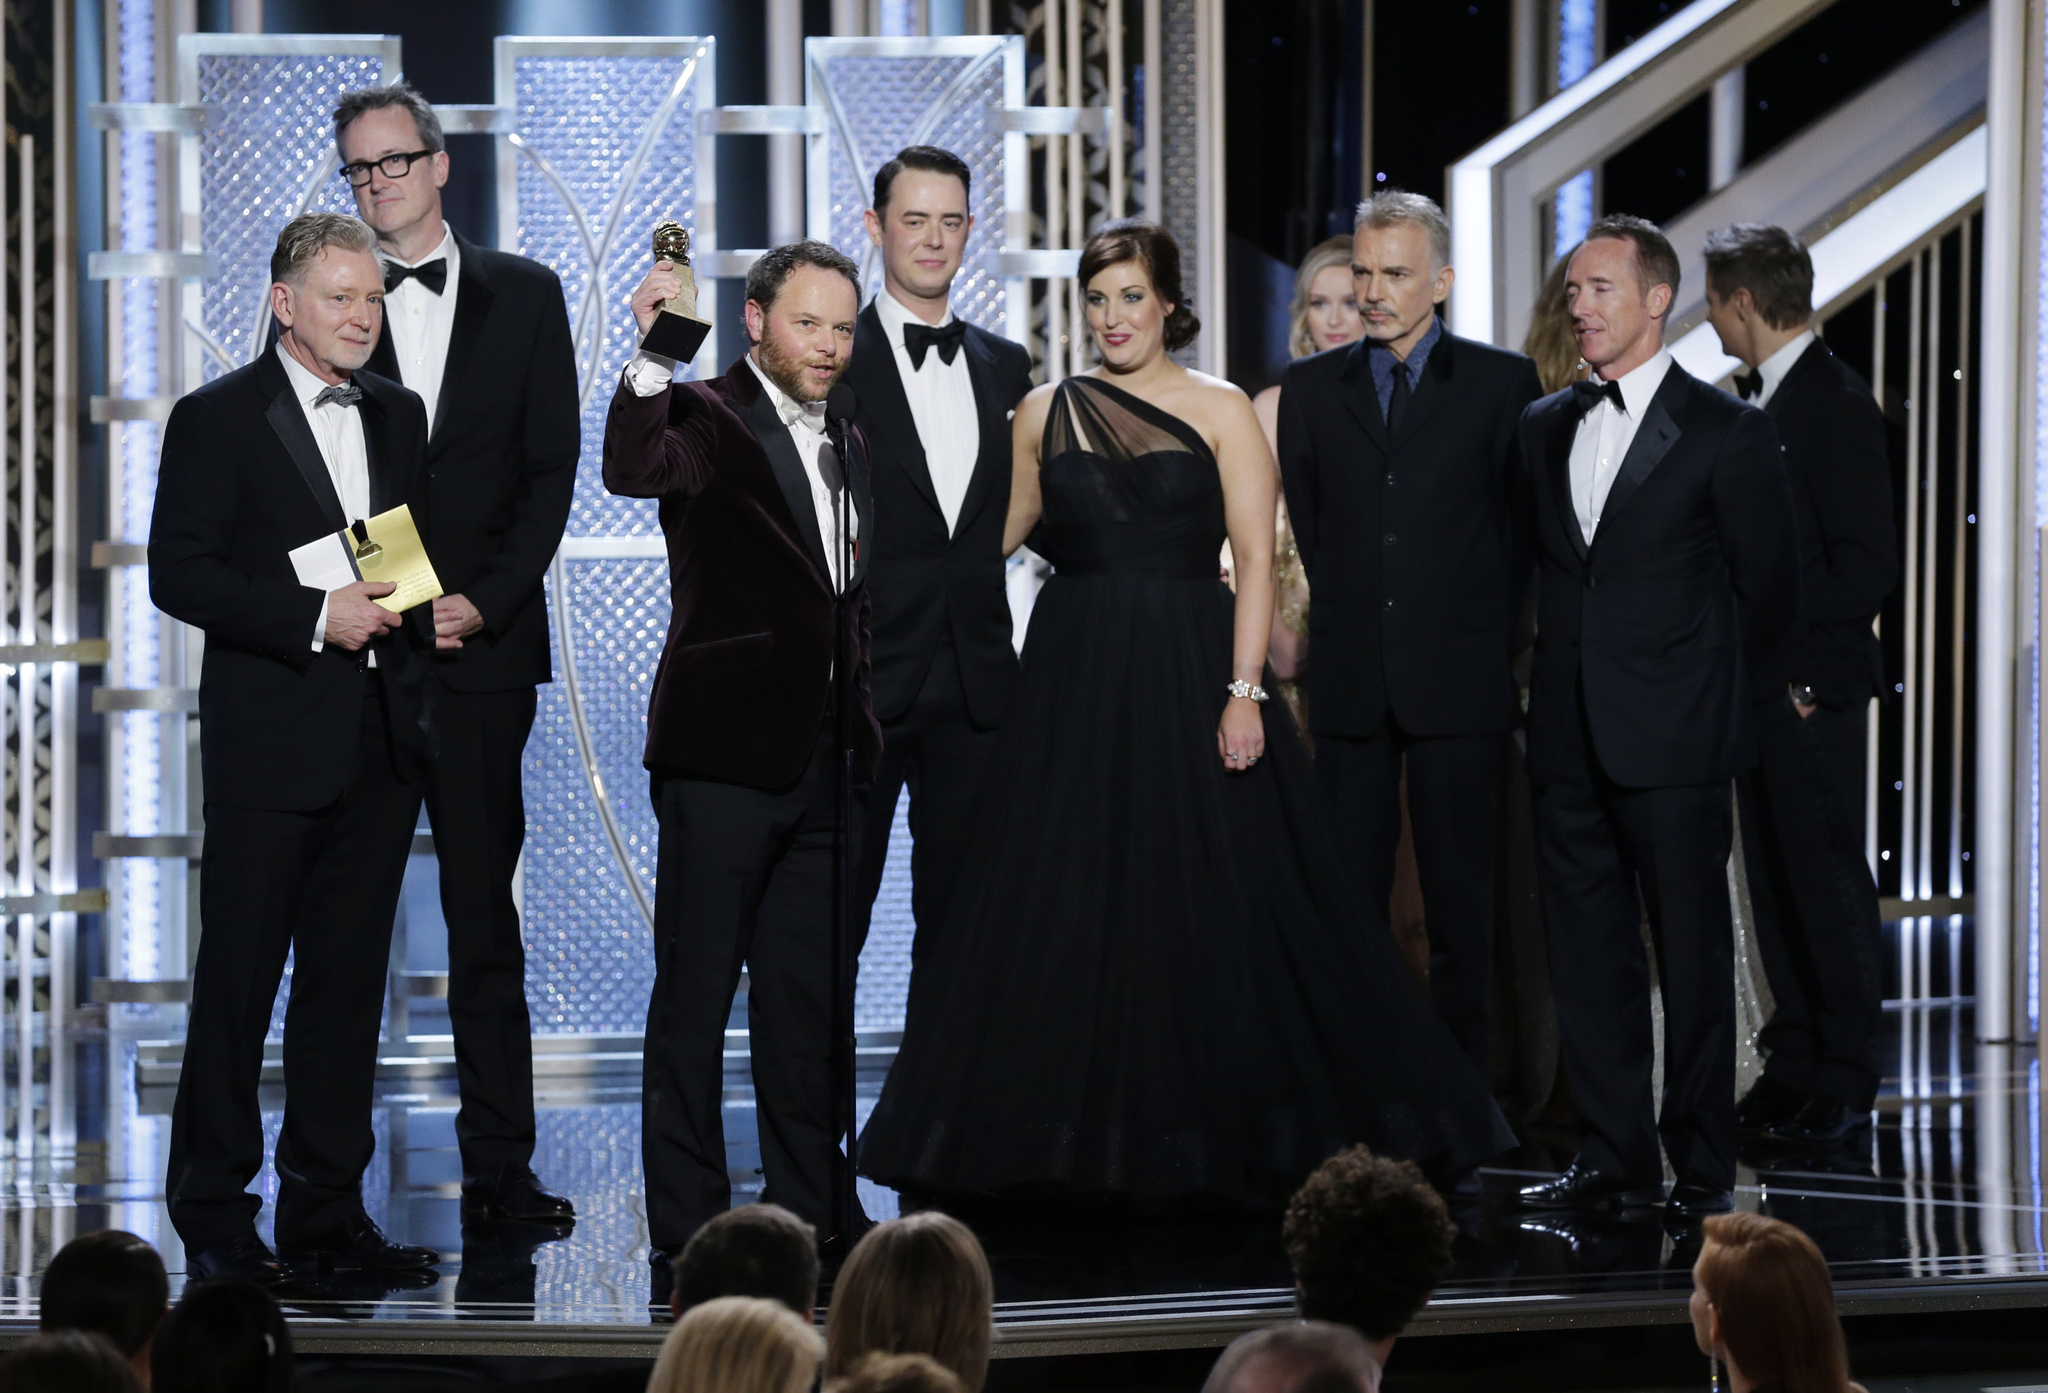 Billy Bob Thornton, Colin Hanks, Noah Hawley and Allison Tolman at event of The 72nd Annual Golden Globe Awards (2015)